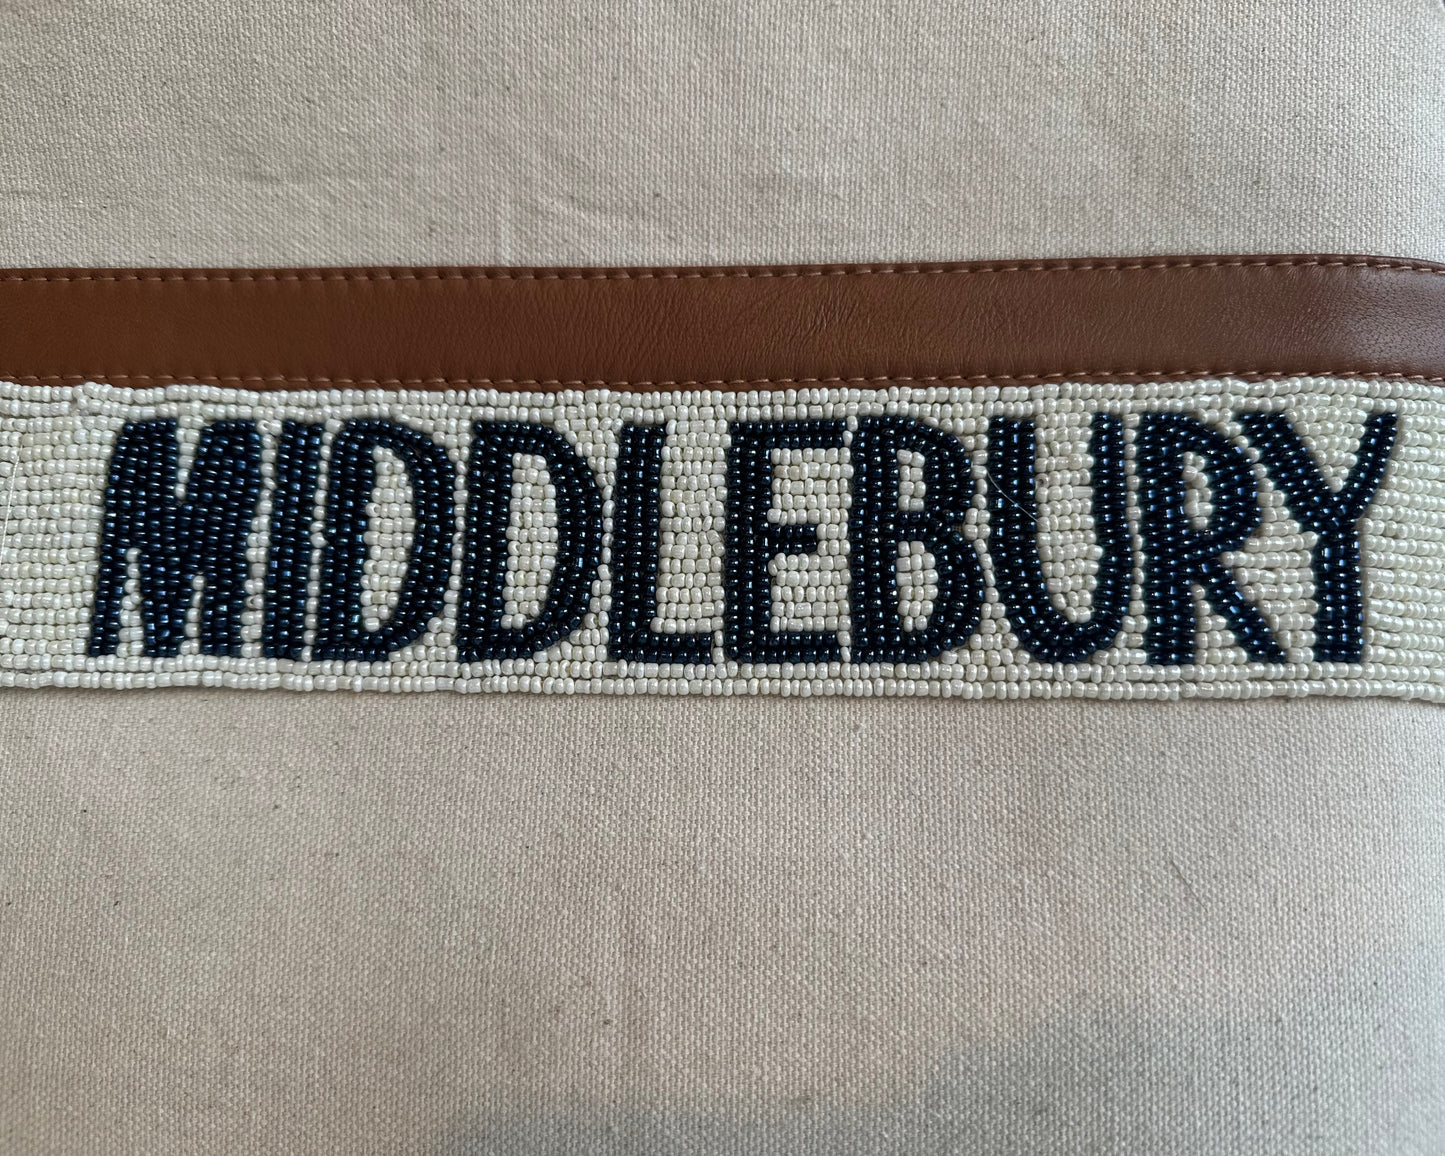 Image of Middlebury College Beaded Canvas MIDDLEBURY Tote bag